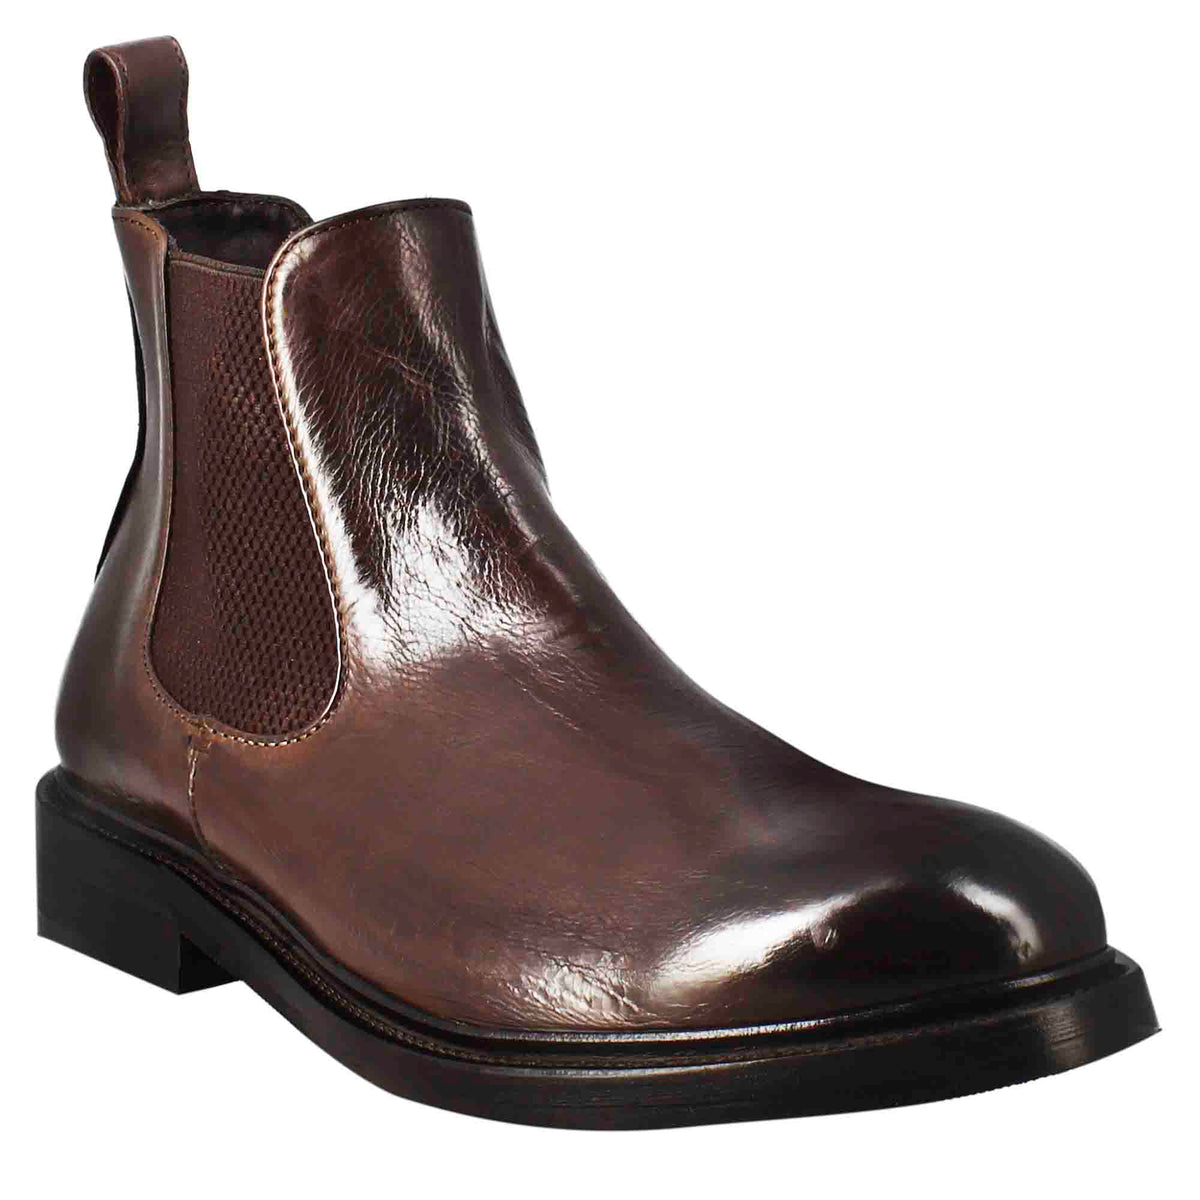 Men's Chelsea Diver boot in dark brown washed leather